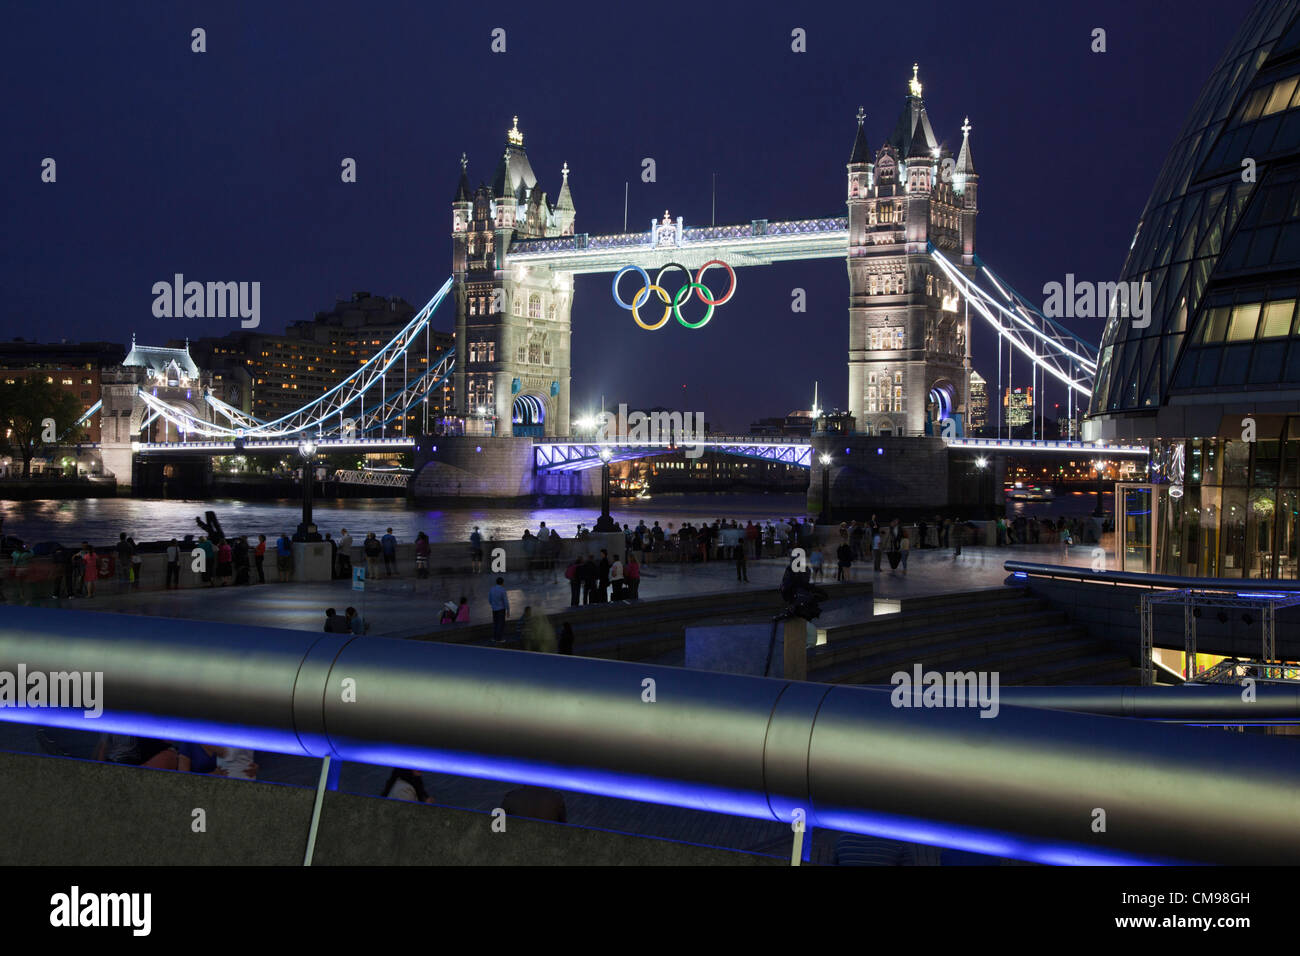 London, England, UK. Wednesday, 27 June 2012, Illumination of Tower Bridge with Display of the Olympic Rings One Month Before the Start of the 2012 Games in London. Stock Photo